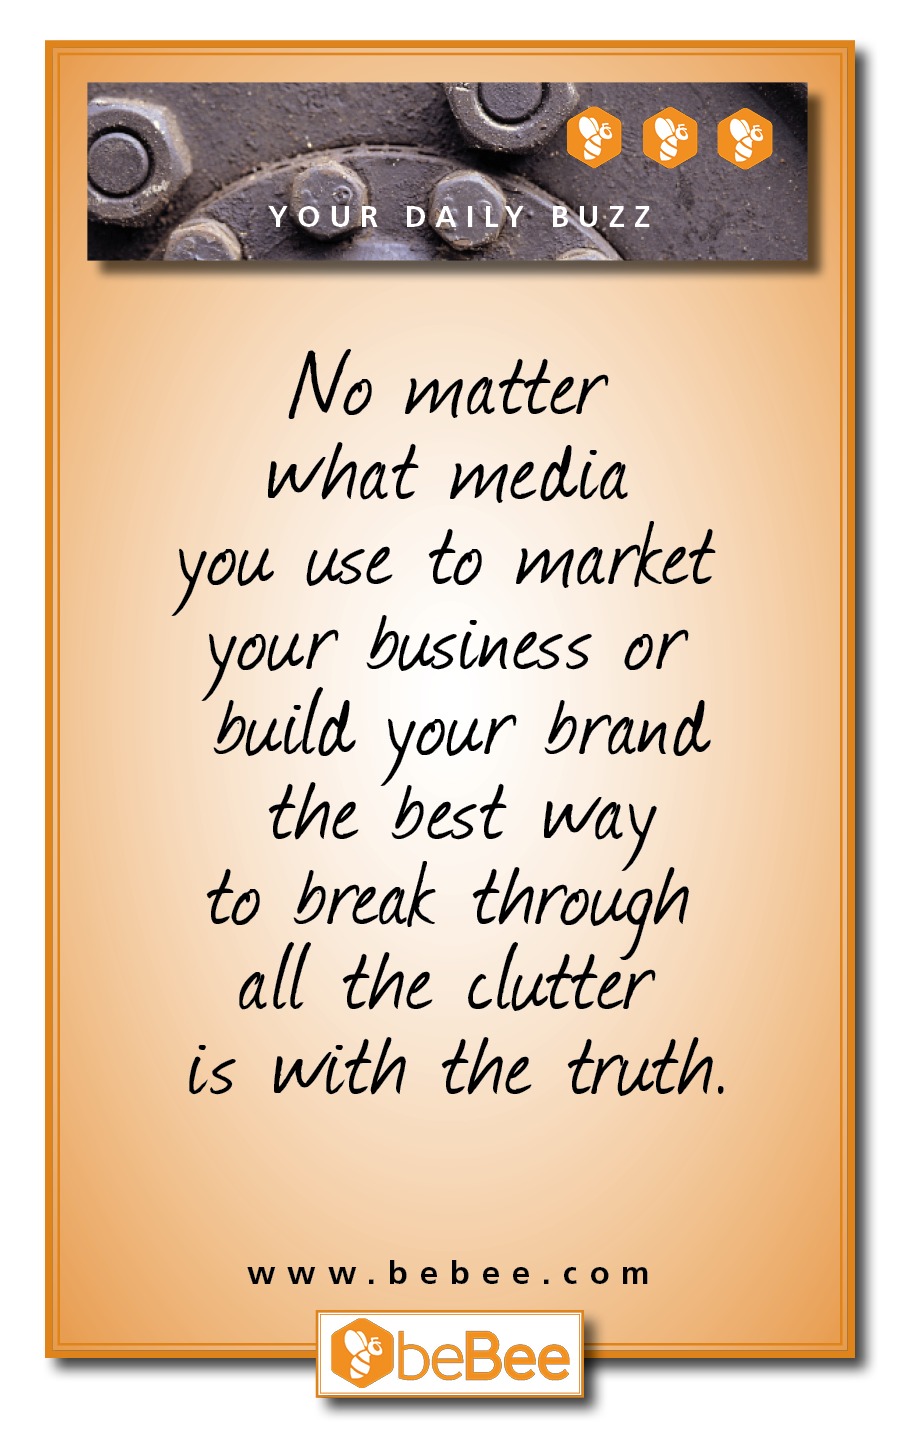 =~ eee

Na

~ a5) EER ae
No matter
what media
you use to market
our business or

build your brand
the best way

to break through
all the clutter

is with the truth.

www.bebee.com